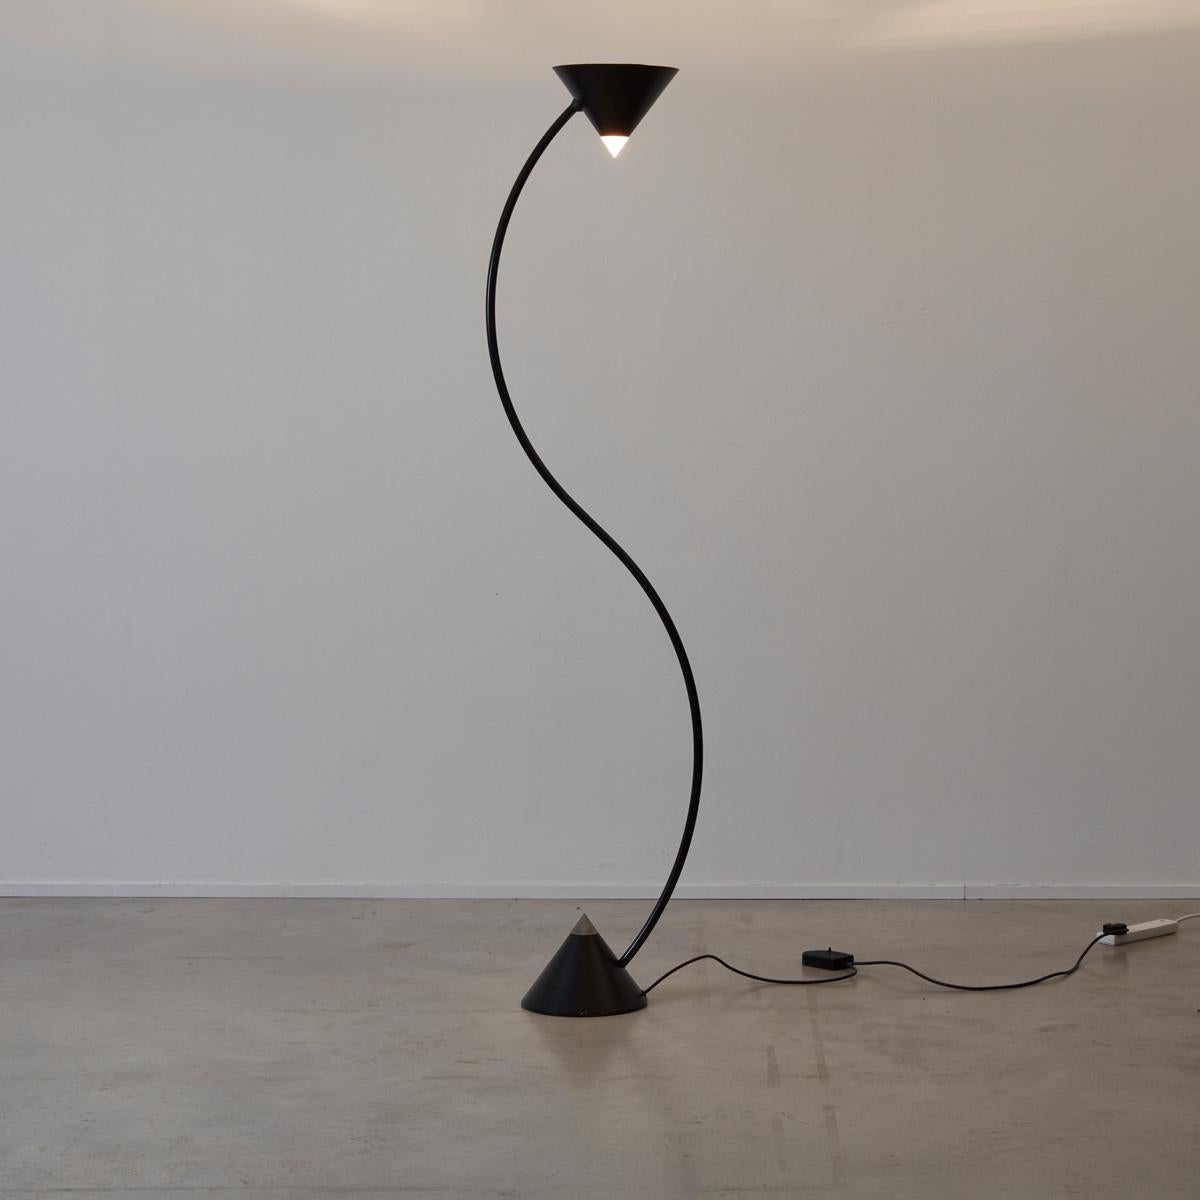 Gary Morga, designer of the Yang lamp, was born in Edinburgh, Scotland in 1956. He studied Silversmithing and Metalwork at Camberwell School of Arts & Crafts, London. In 1986 he was invited to submit designs for the Memphis Milano Lights Exhibition,